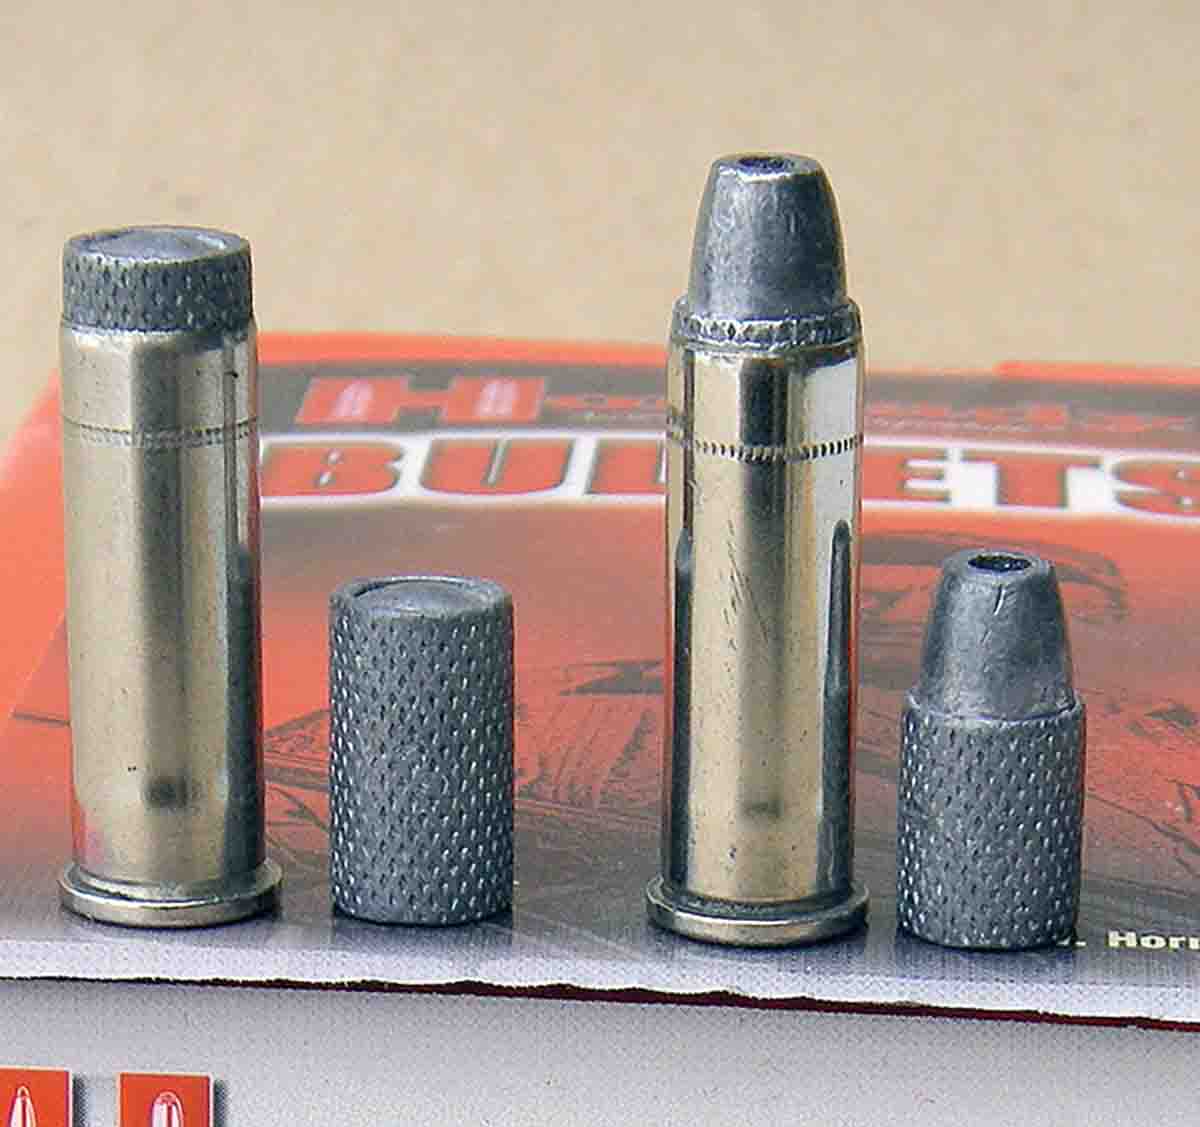 Hornady swaged lead bullets do not feature a crimp groove, so the case is crimped into the bullet. A light to medium roll crimp (shown) is often sufficient. Using a taper crimp die has also proven to give outstanding results.